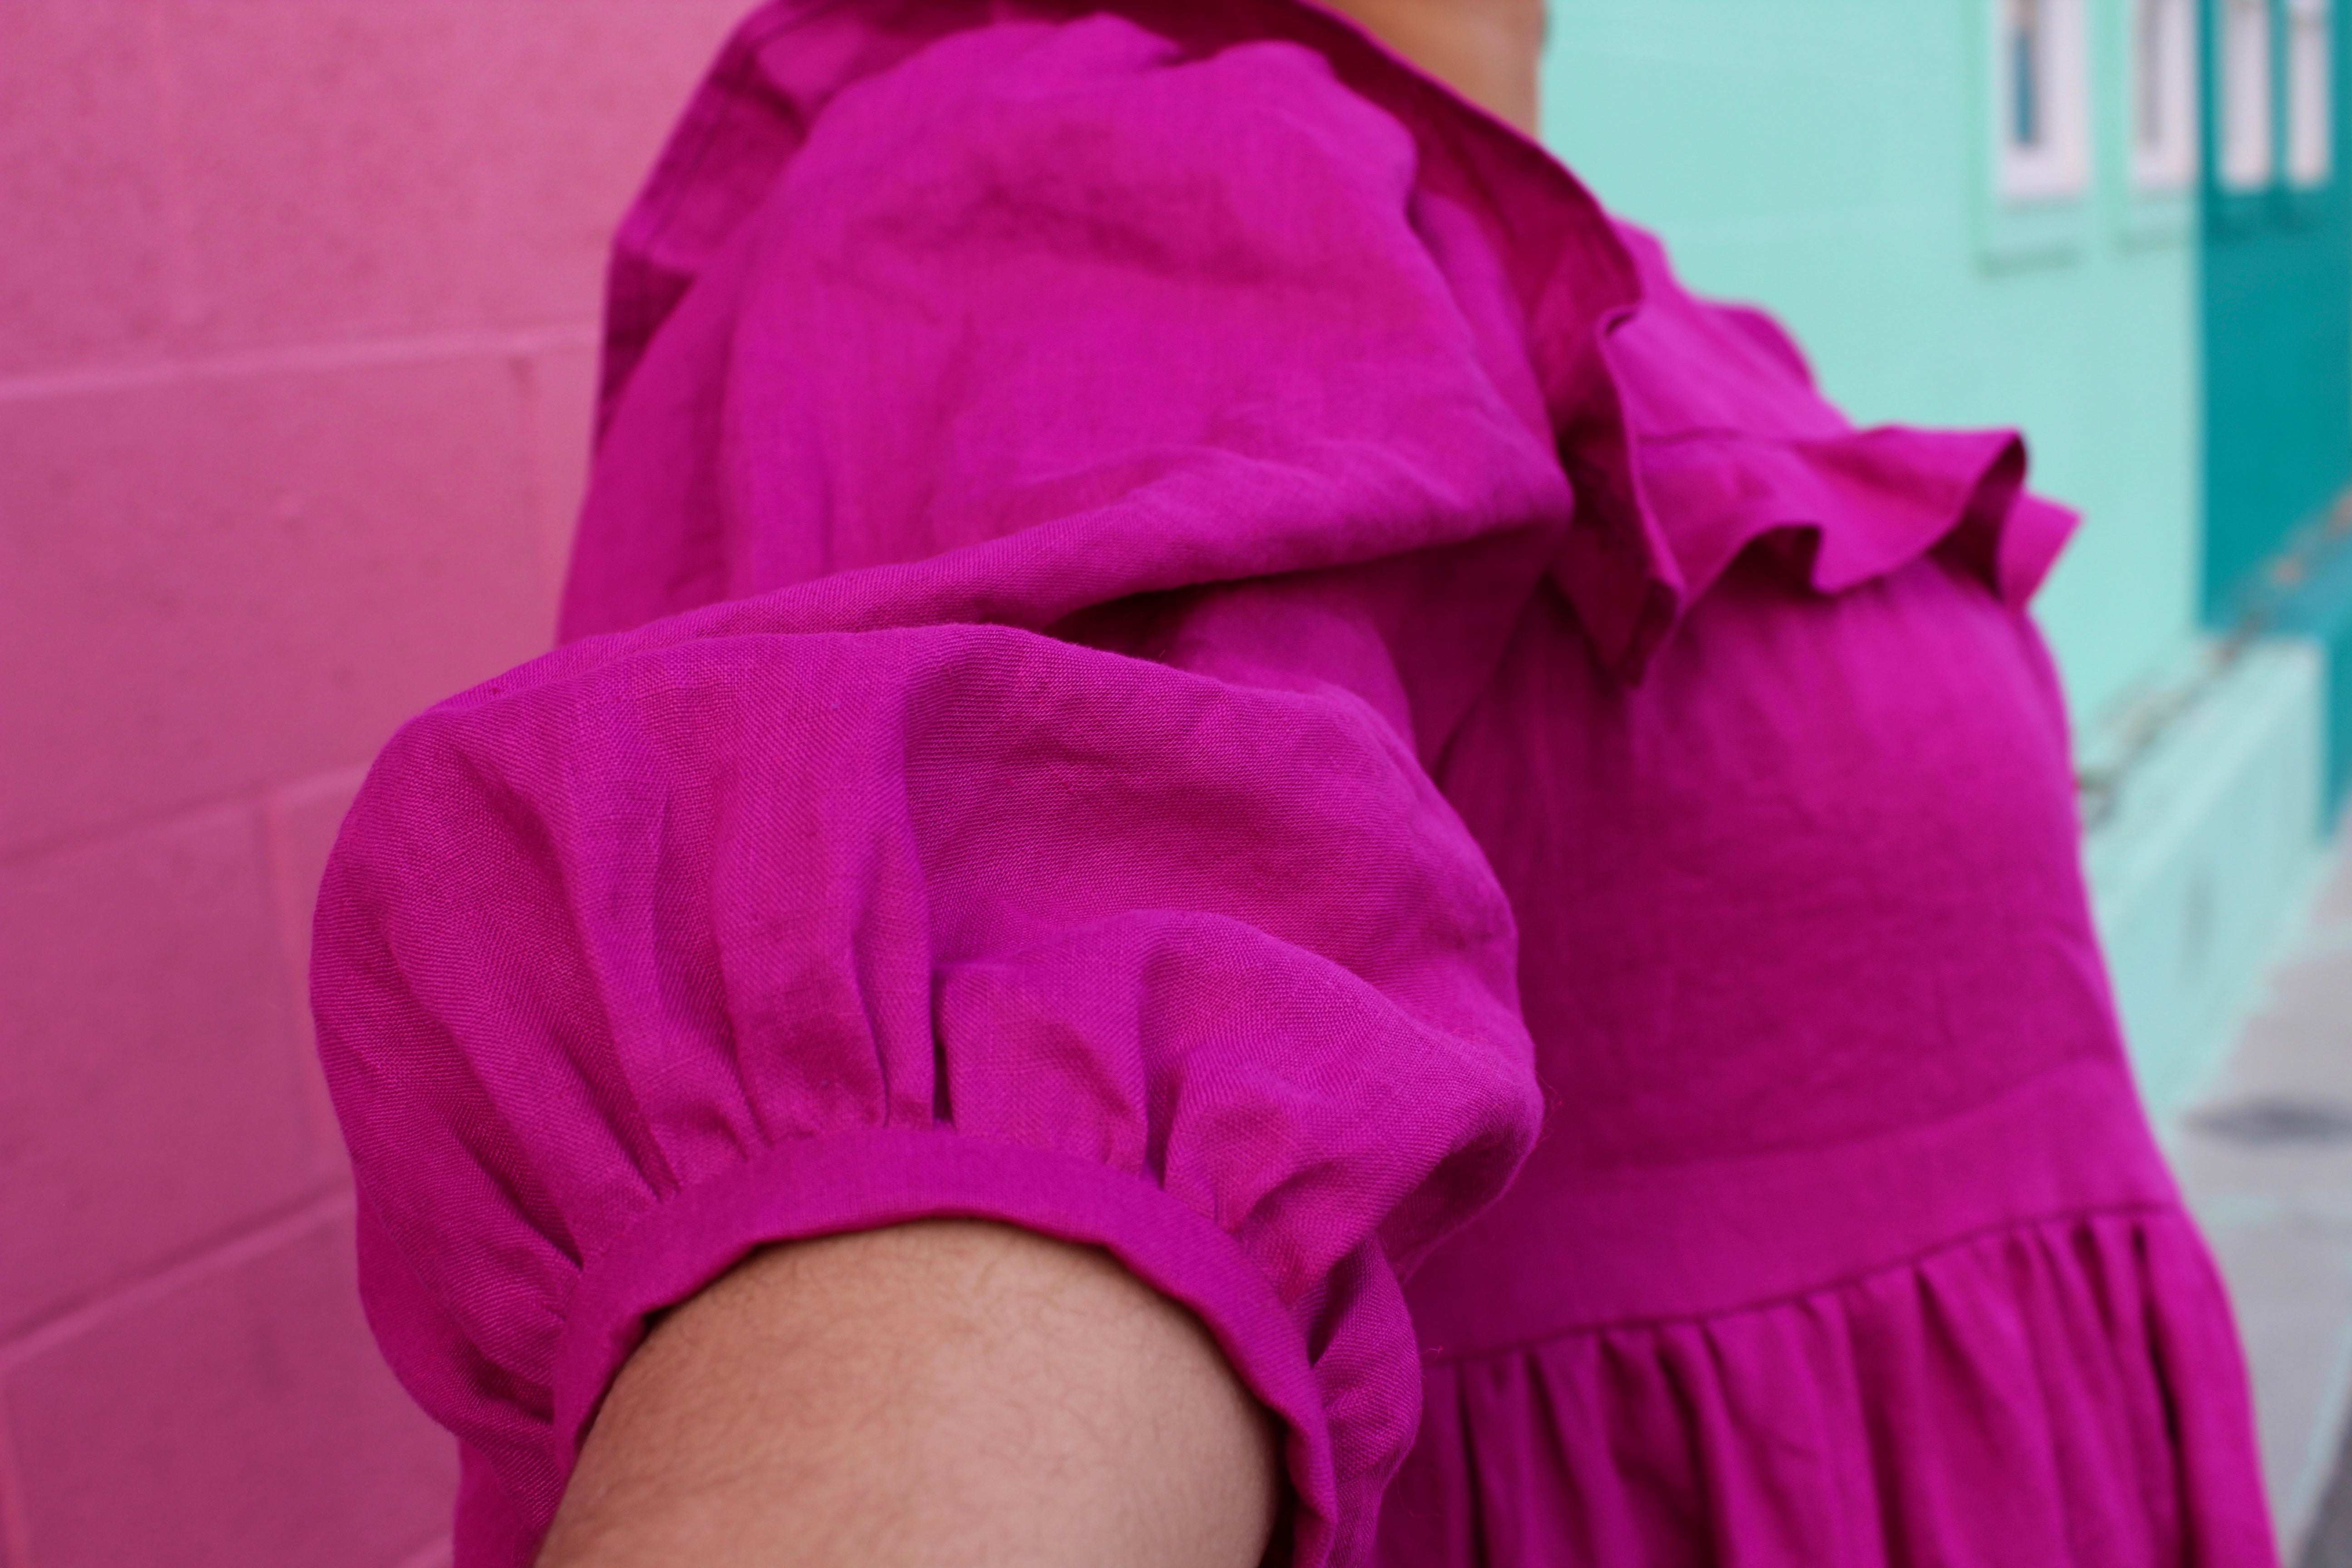 Close up shot of Romy's voluminous, puffy sleeve showing the cuff from the Hinterland dress pattern